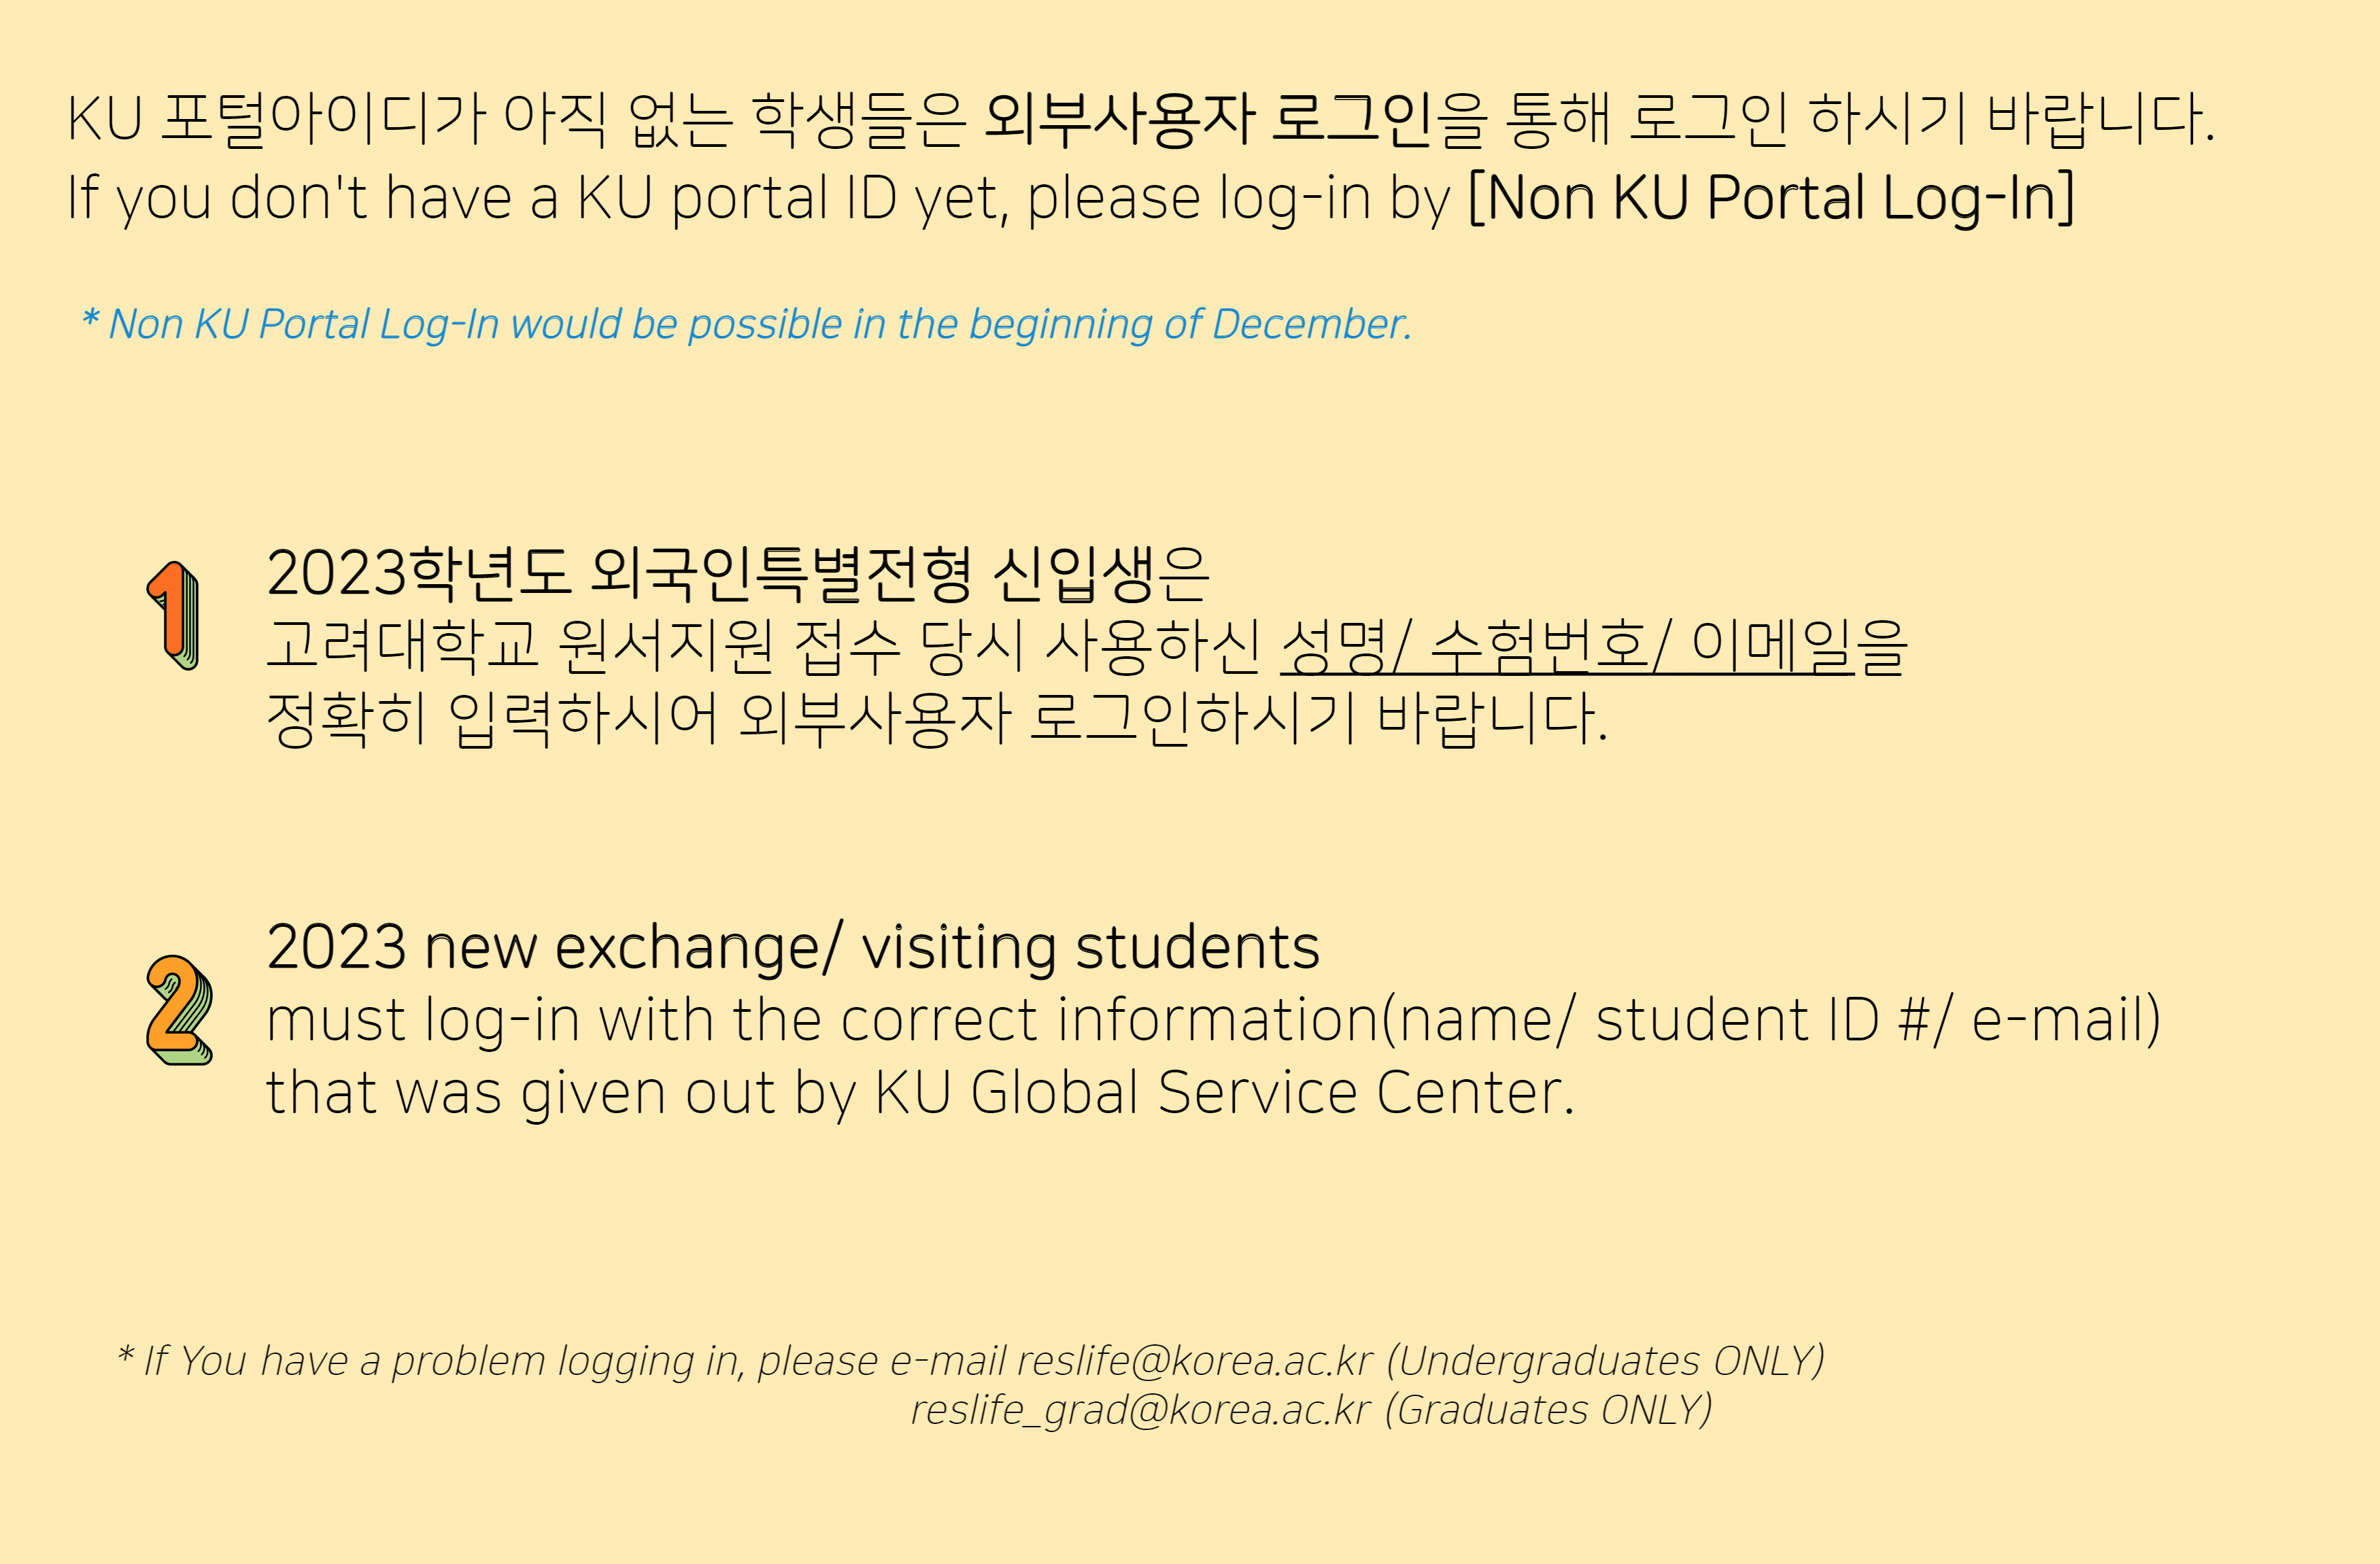 [CJ/Anam Int'l House] 2023 SPRING SESSION NOTICE & Application Instruction 이미지